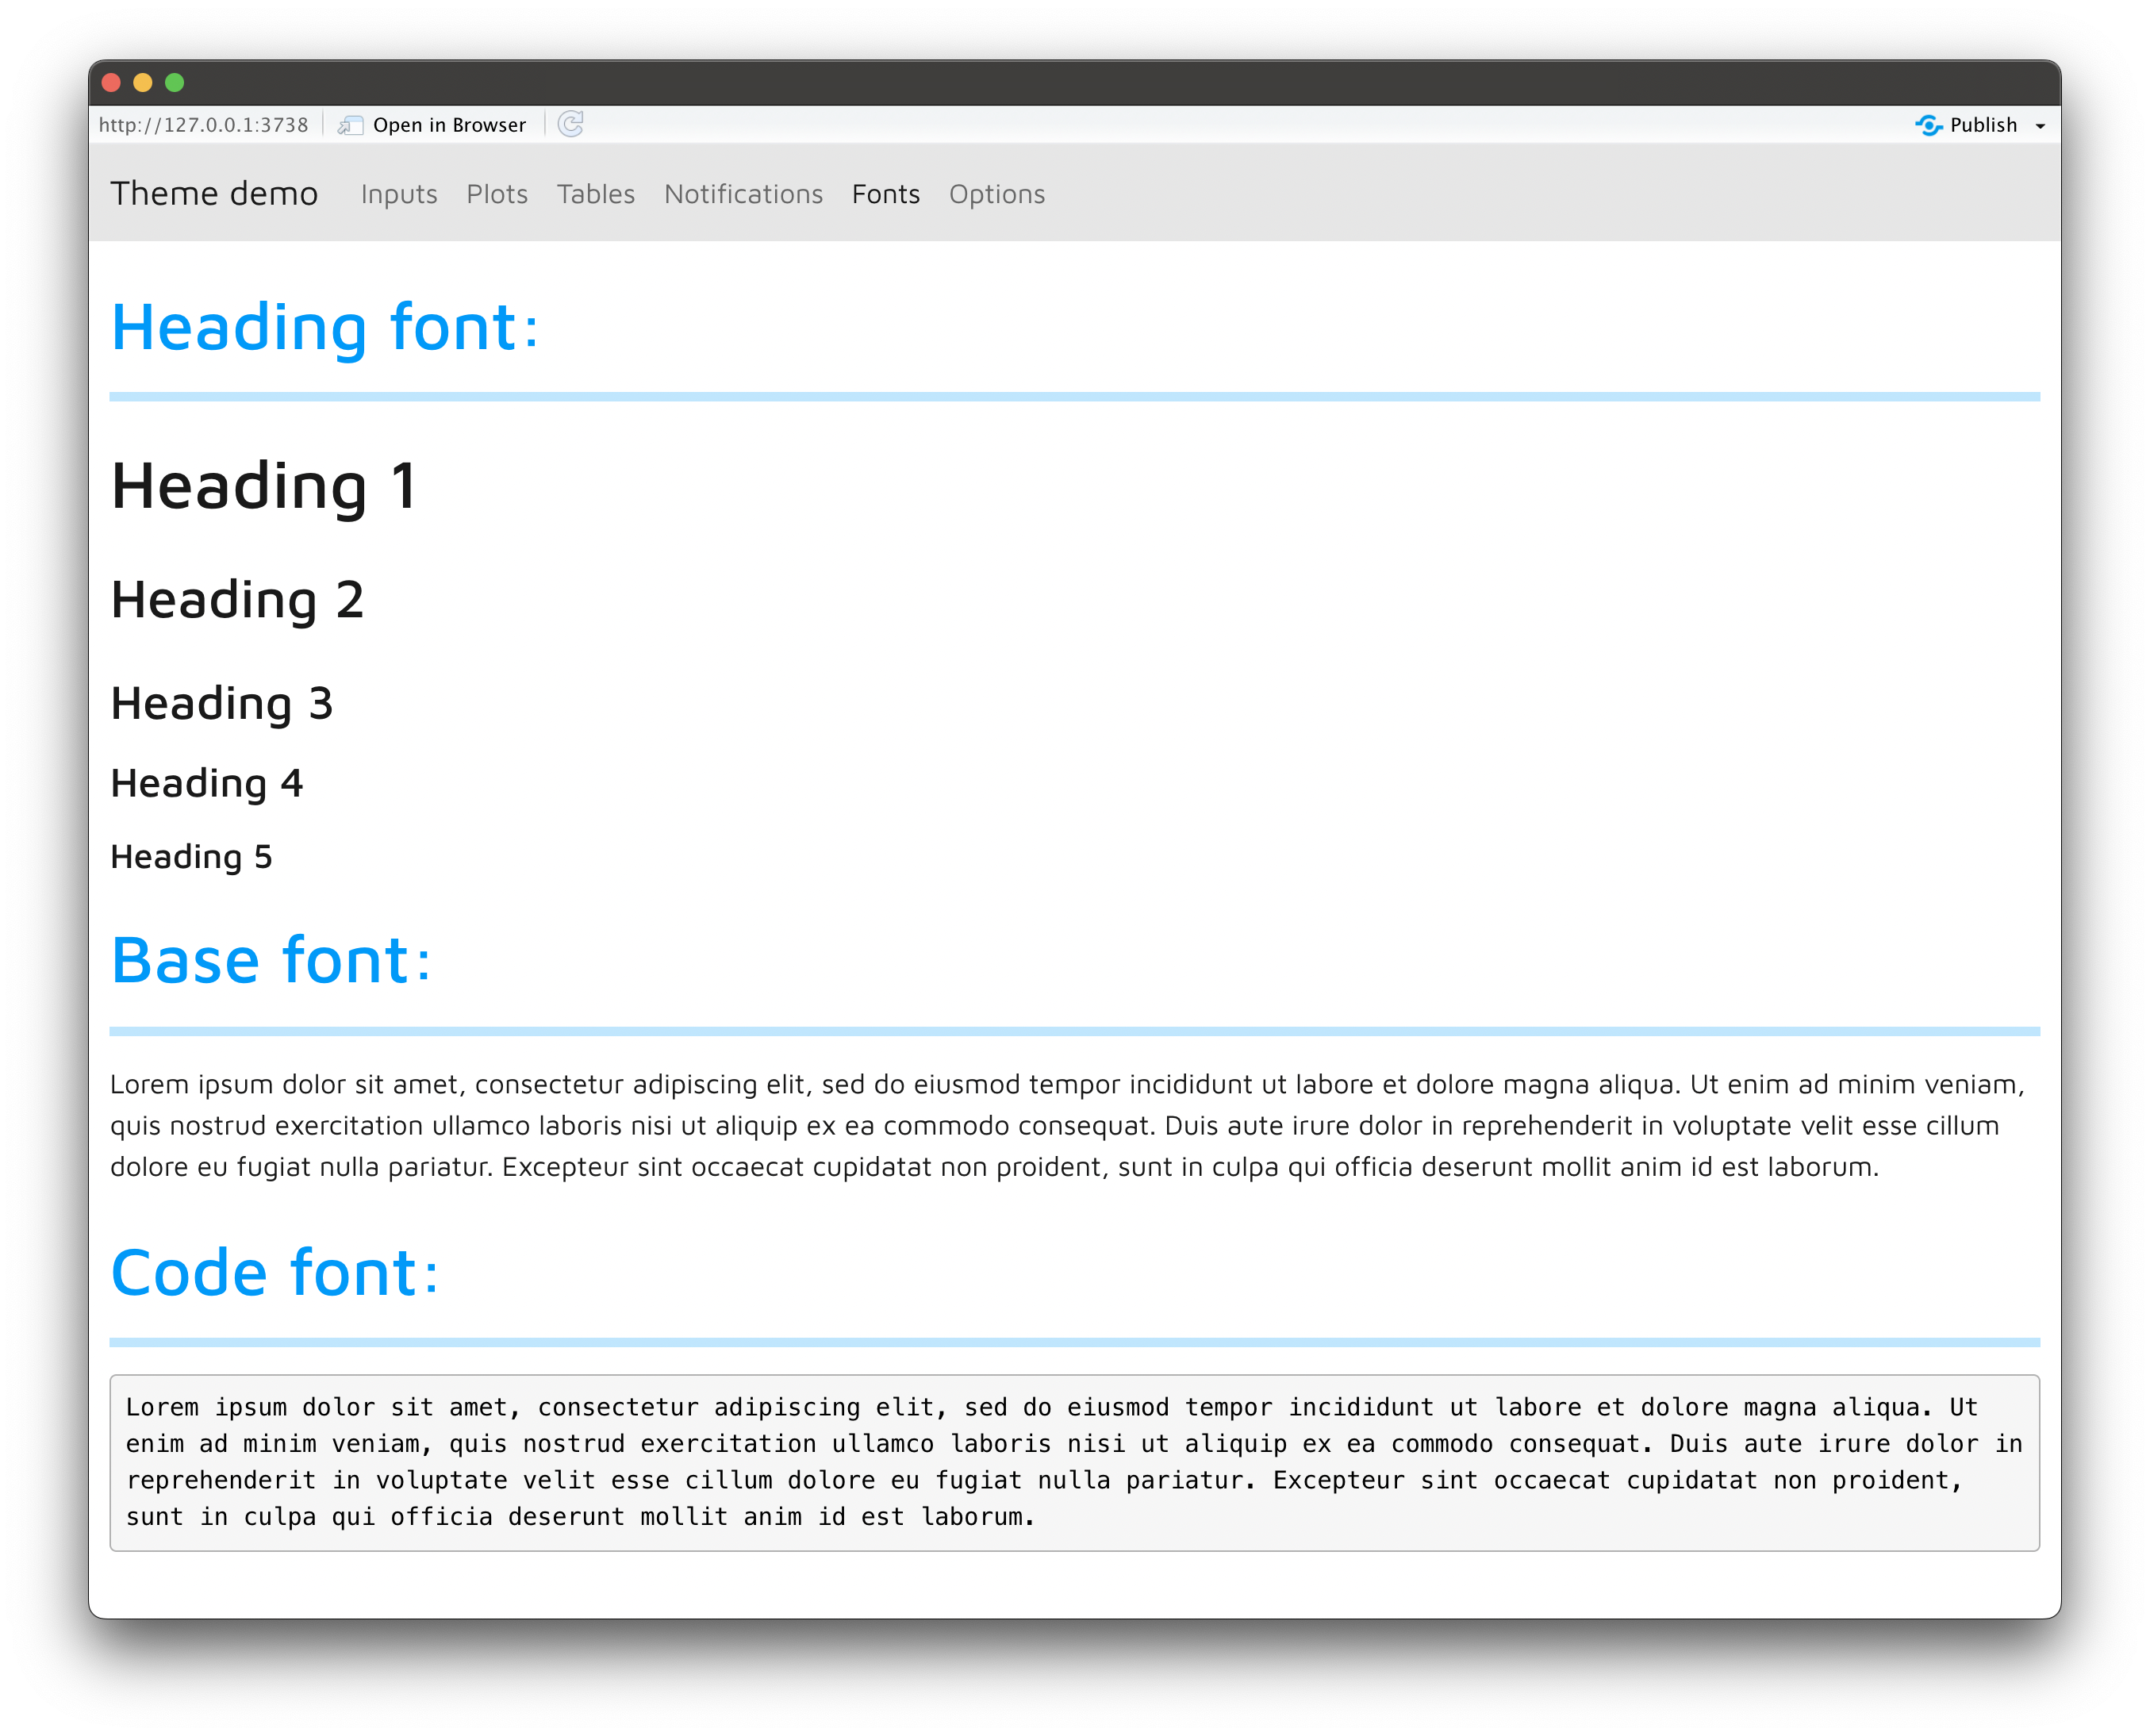 Image 5 - Example Shiny app with custom font and colors